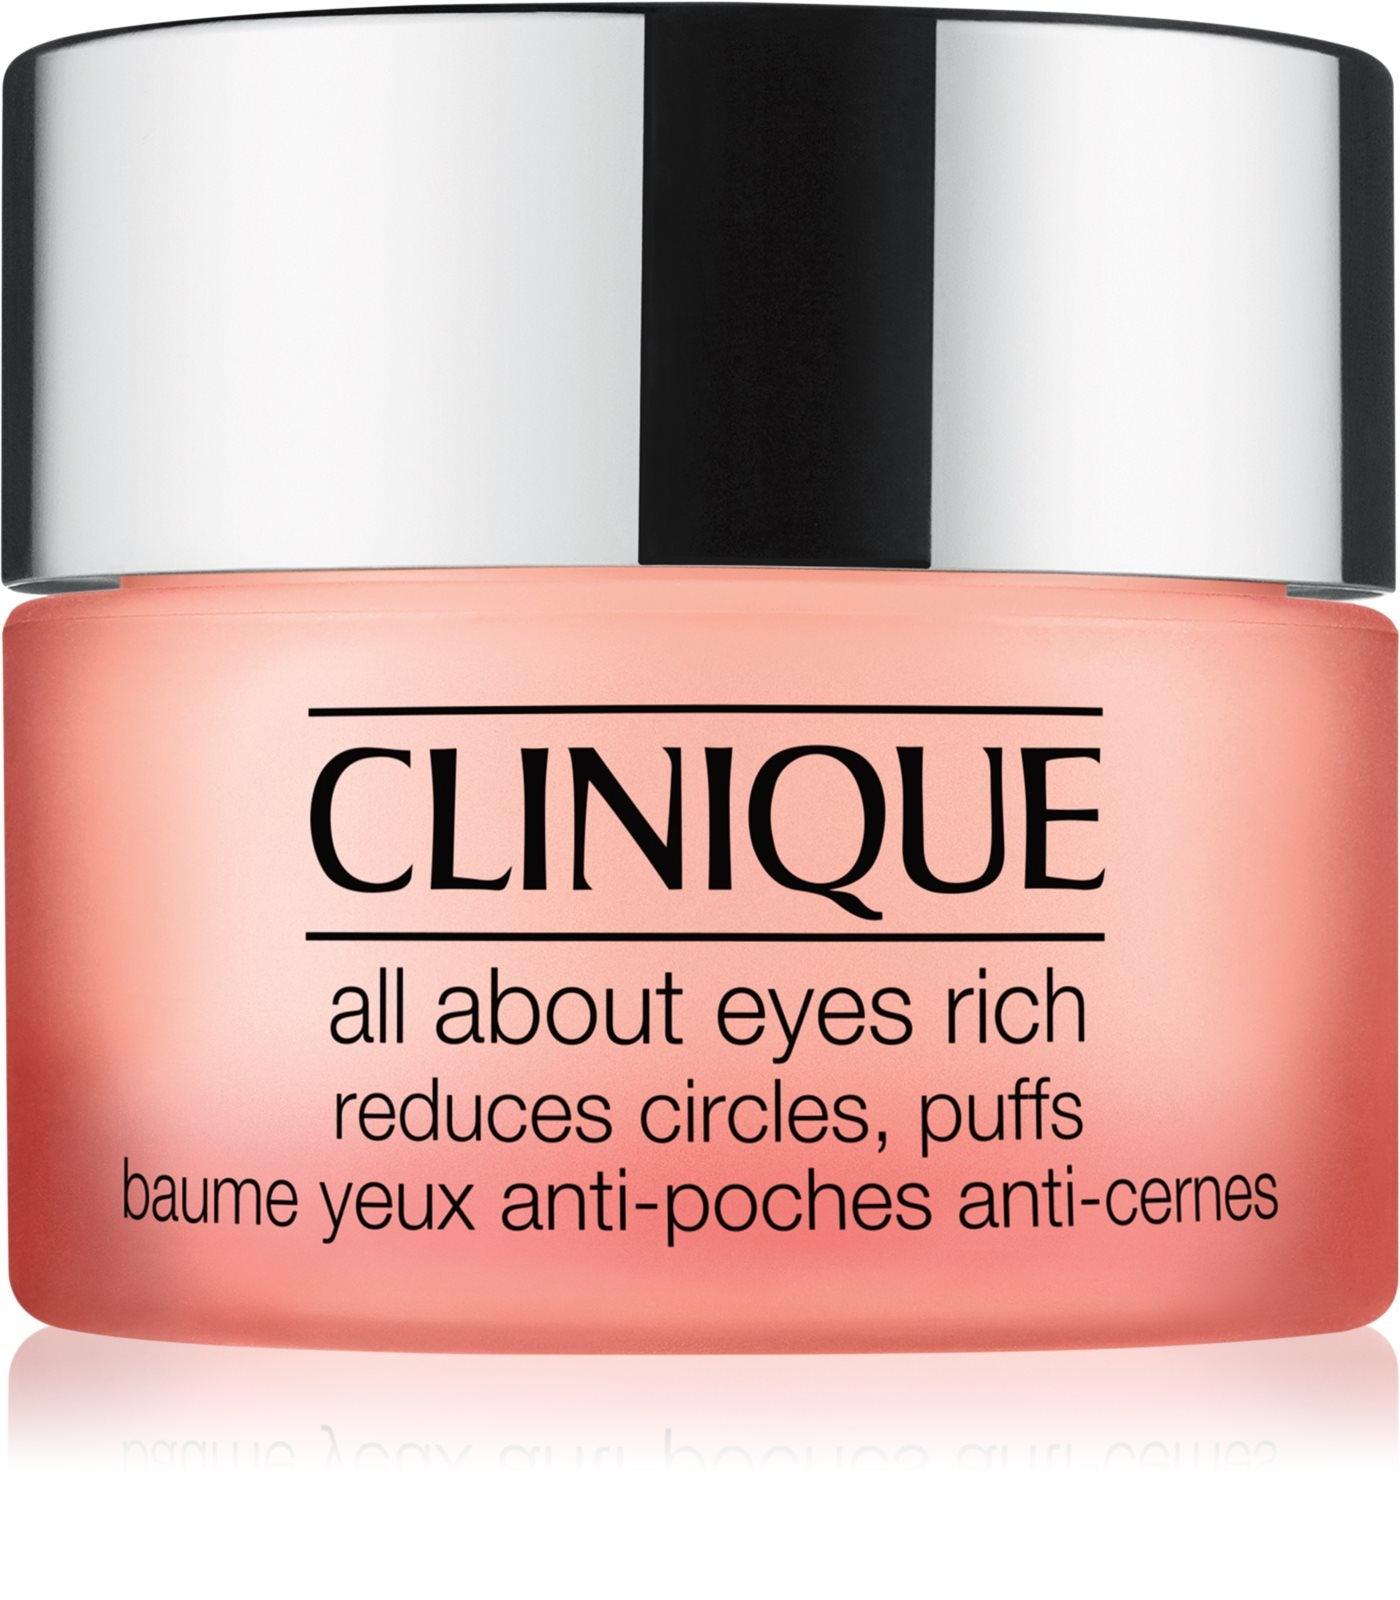 Clinique All About Eyes™ Rich Moisturizing Eye Cream to Treat Swelling and Dark Circles - Perfume Oasis